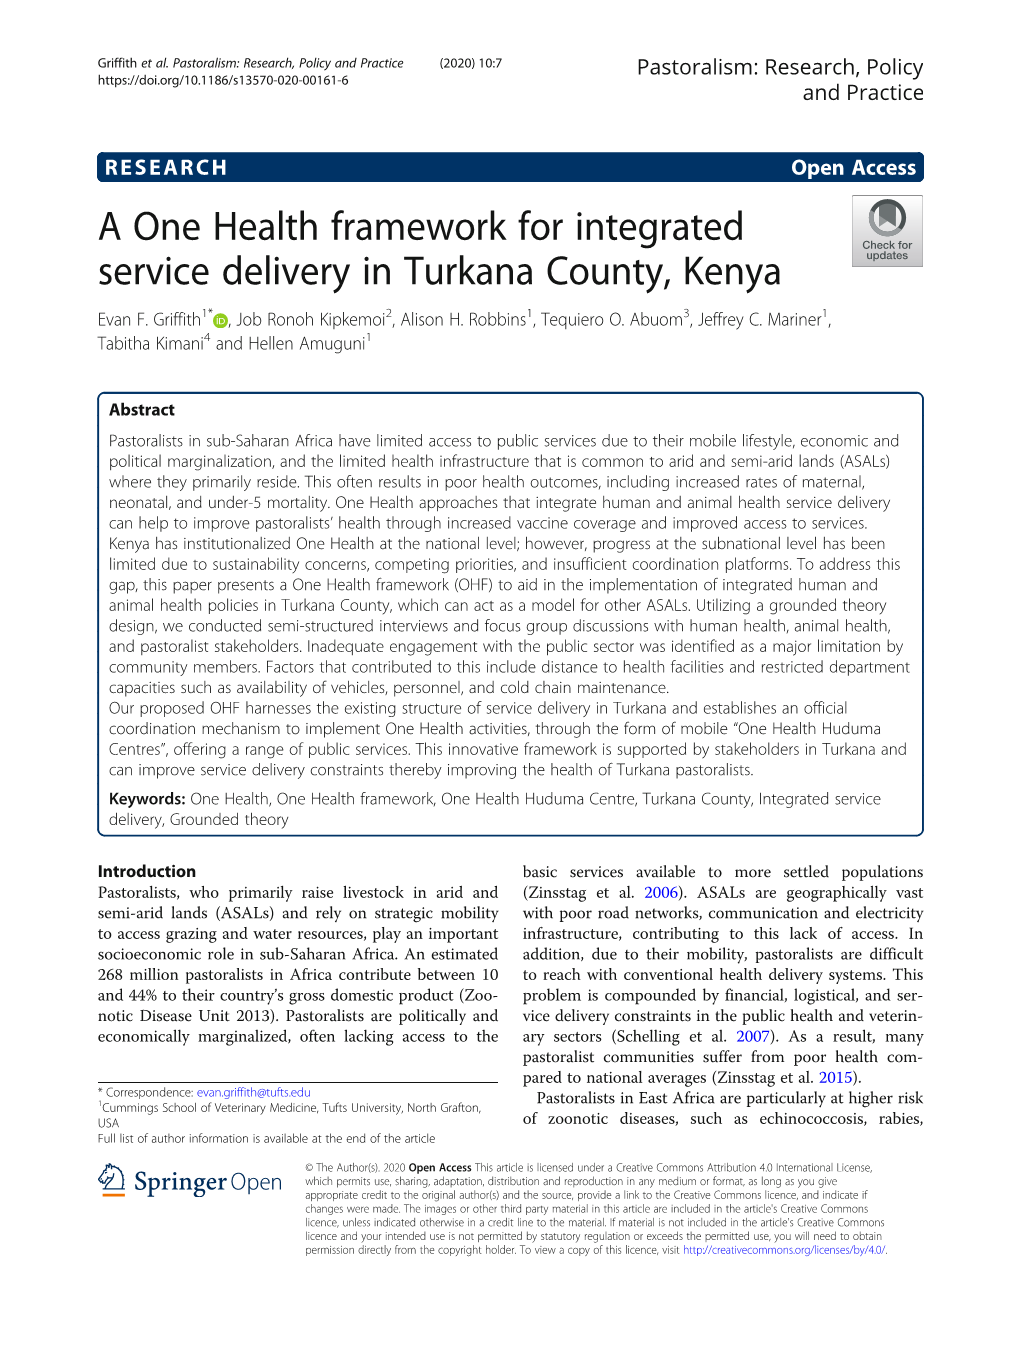 A One Health Framework for Integrated Service Delivery in Turkana County, Kenya Evan F